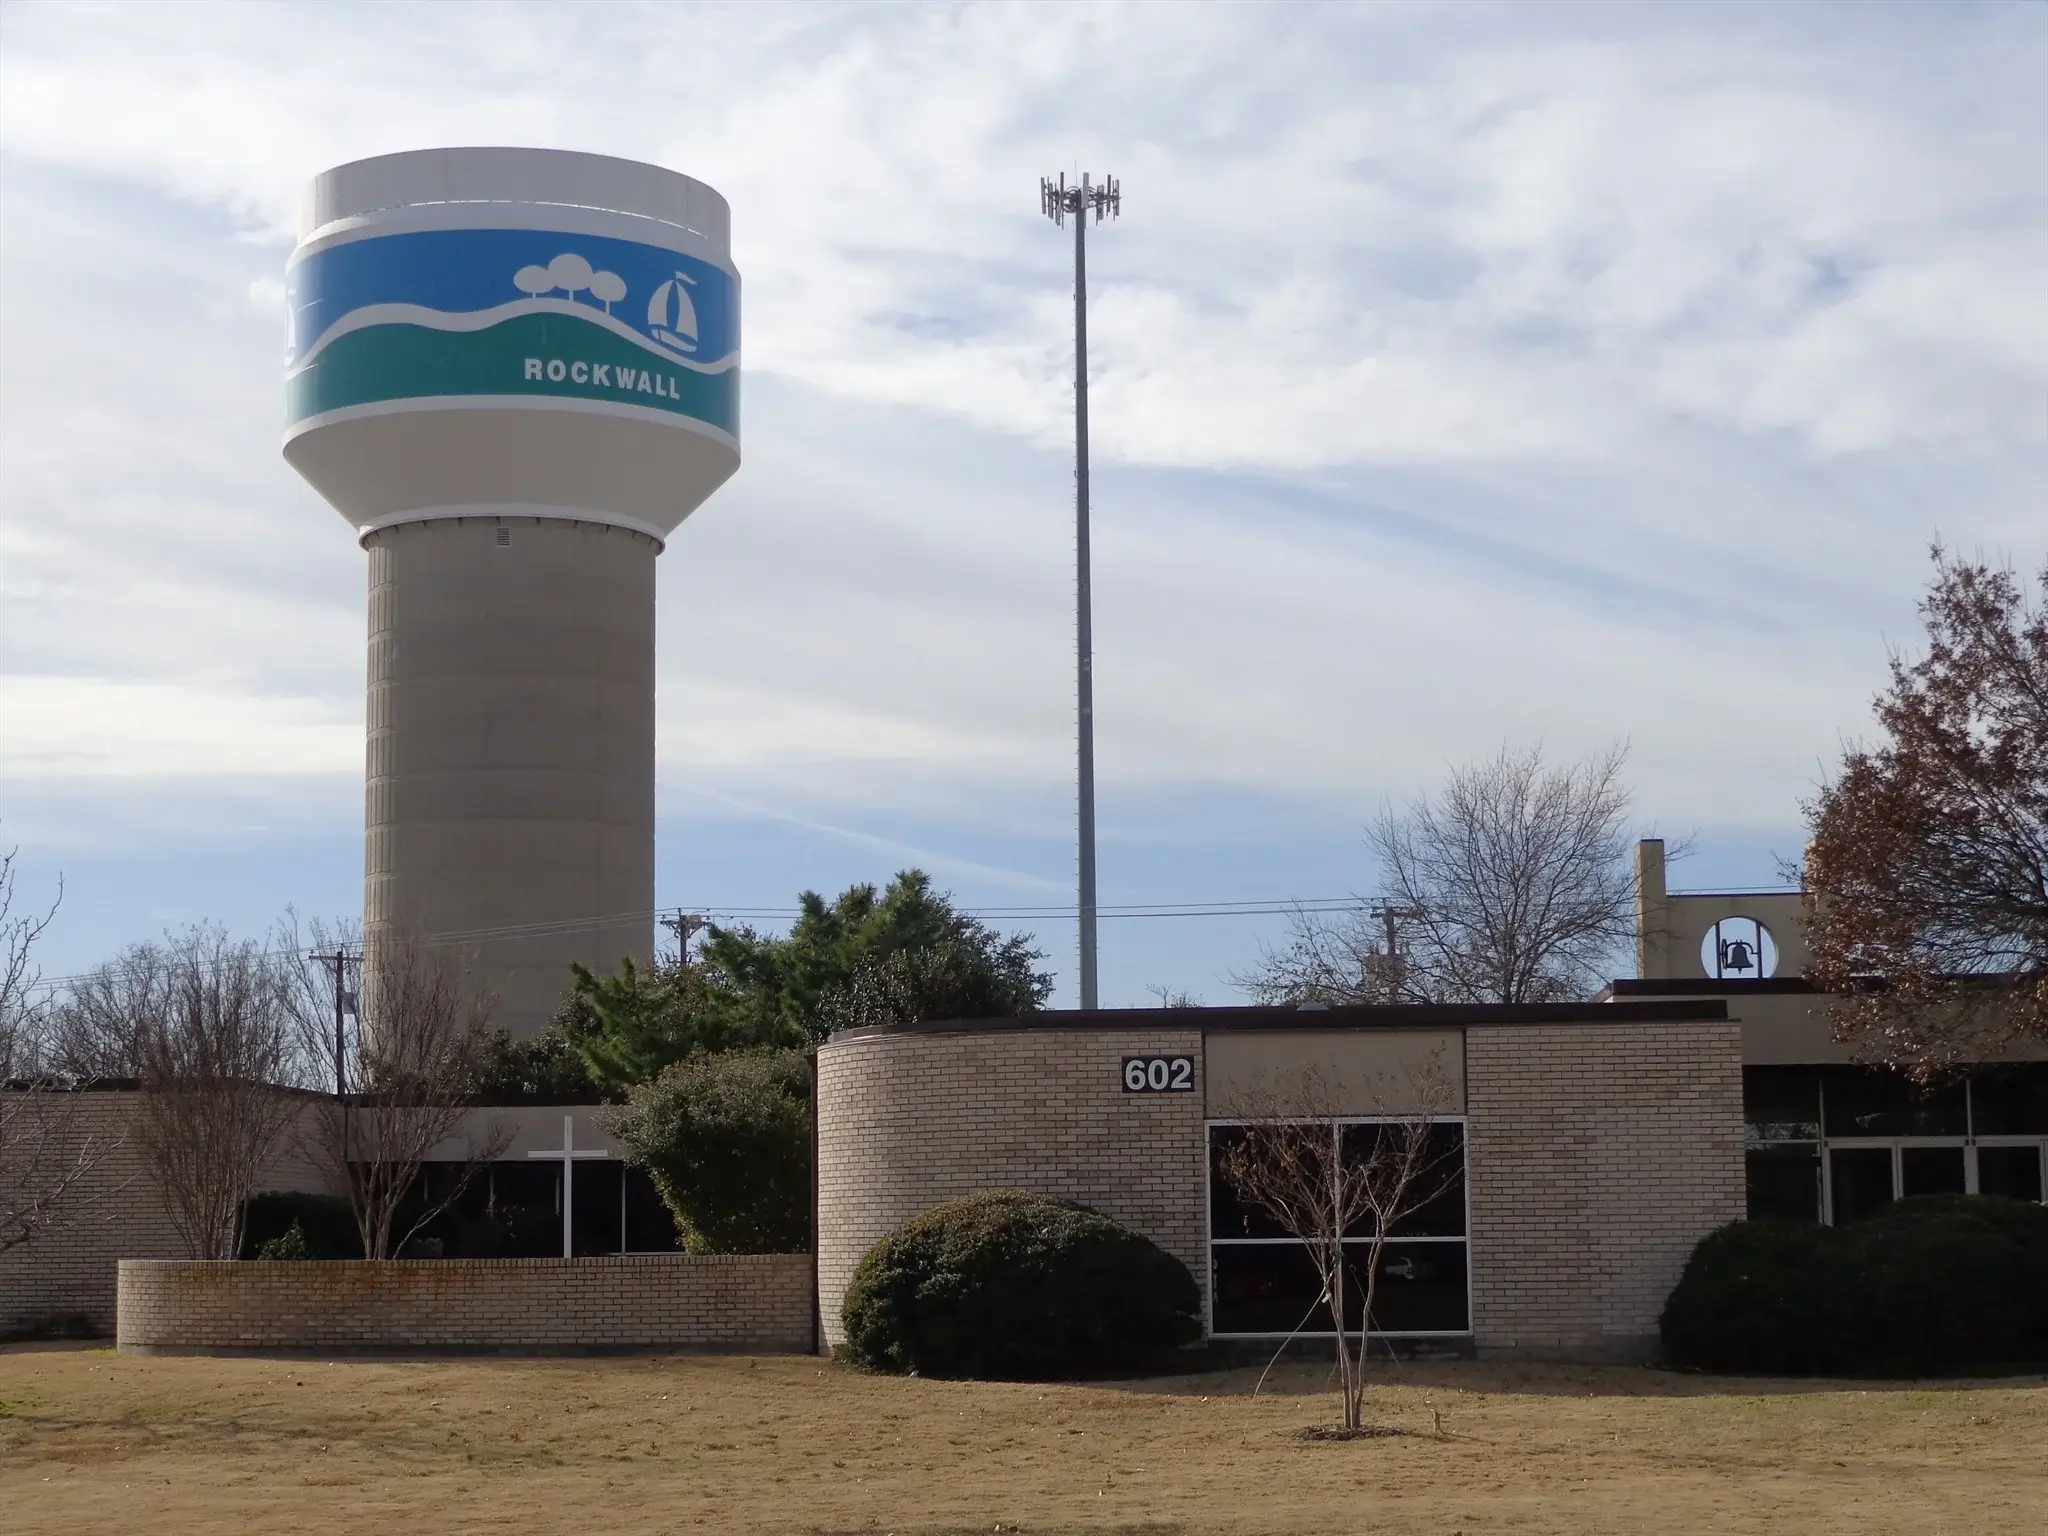 Rockwall Water Tower above building